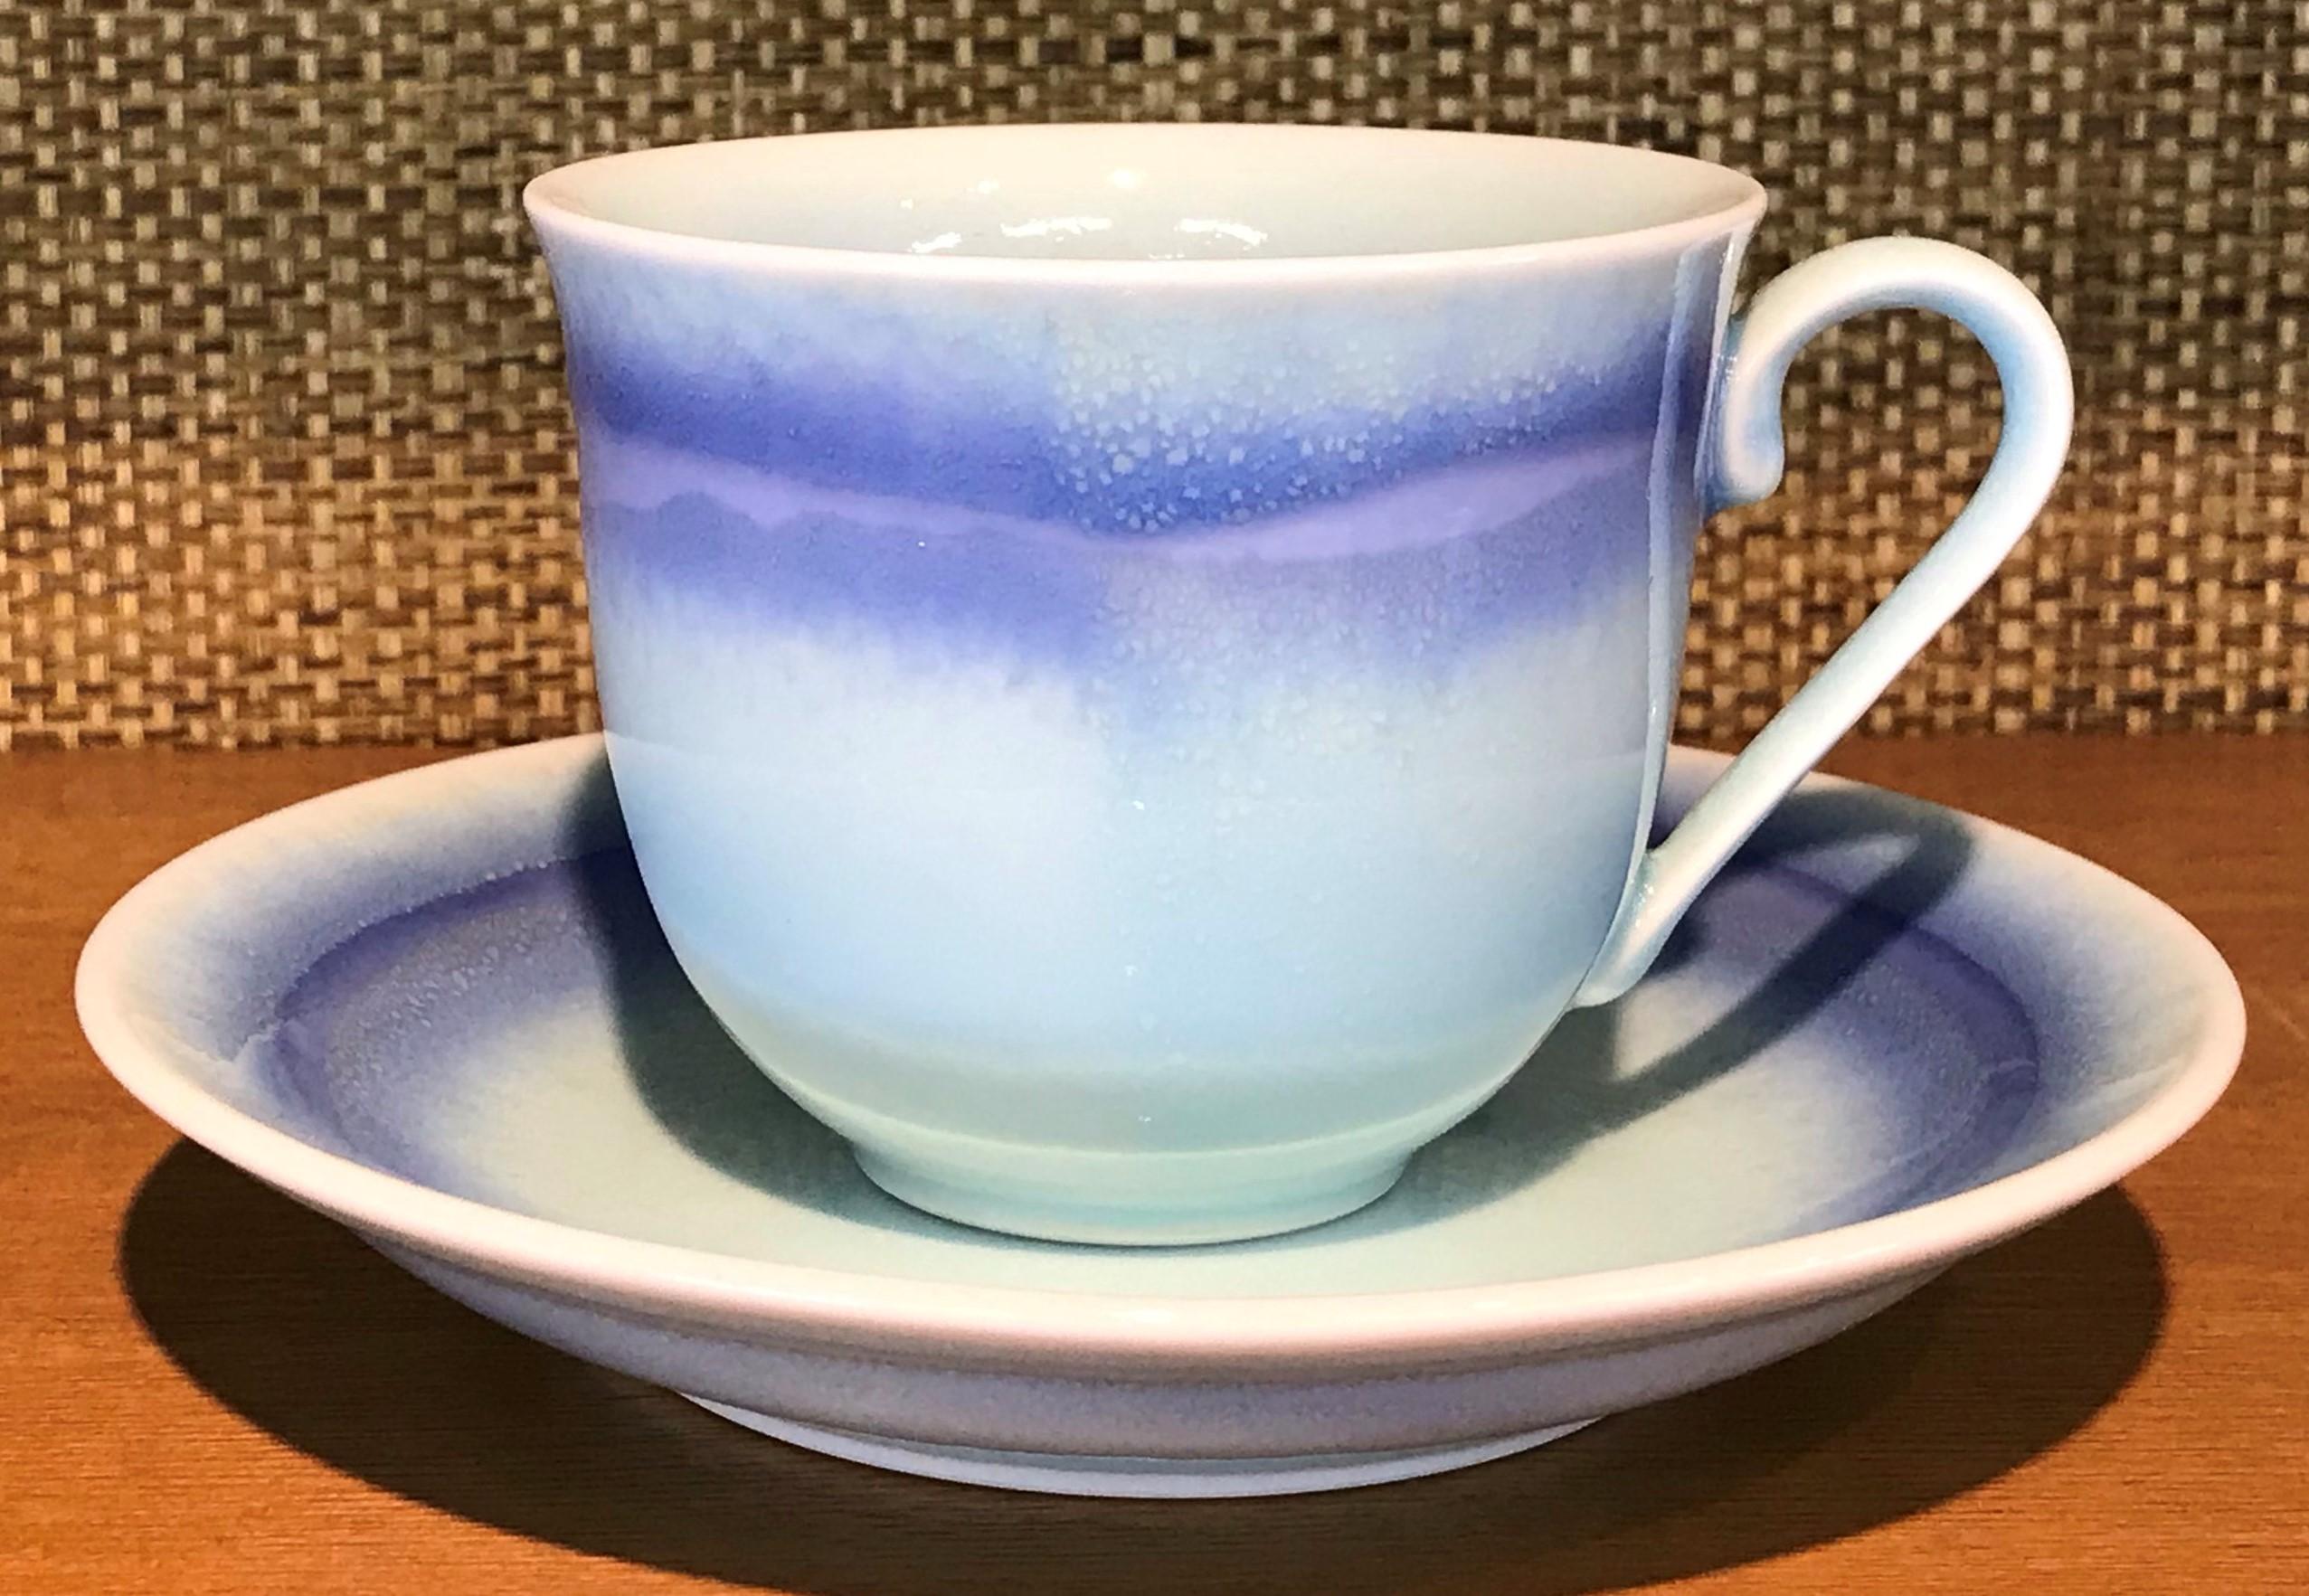 Contemporary Japanese Hand-Glazed Blue White Porcelain Cup and Saucer by Master Artist